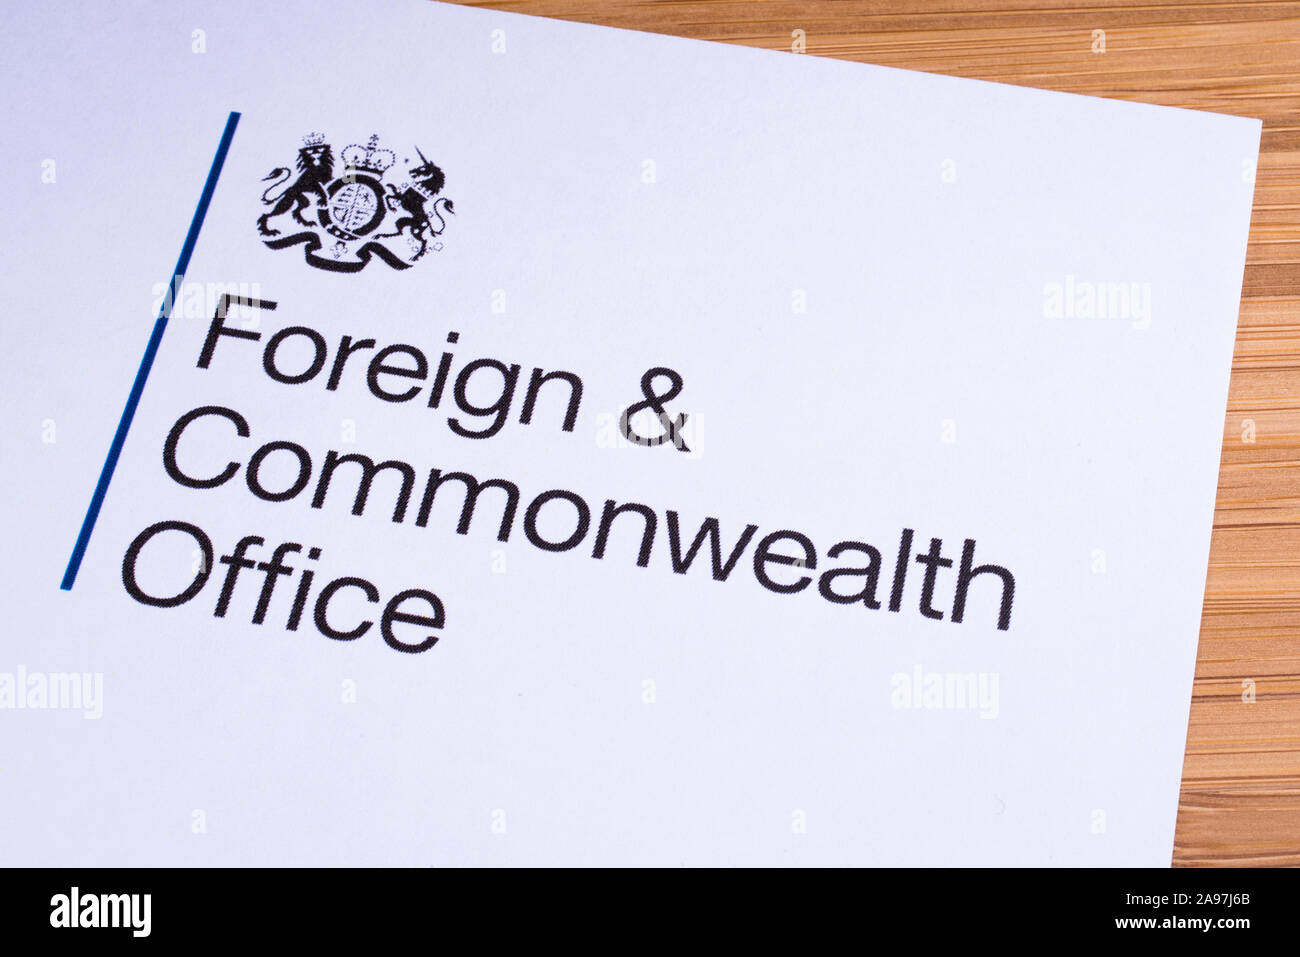 London, UK - March 12th 2019: Logo of the Foreign and Commonwealth Office, pictured on a piece of paper. The FCO is a ministerial department of the UK Stock Photo